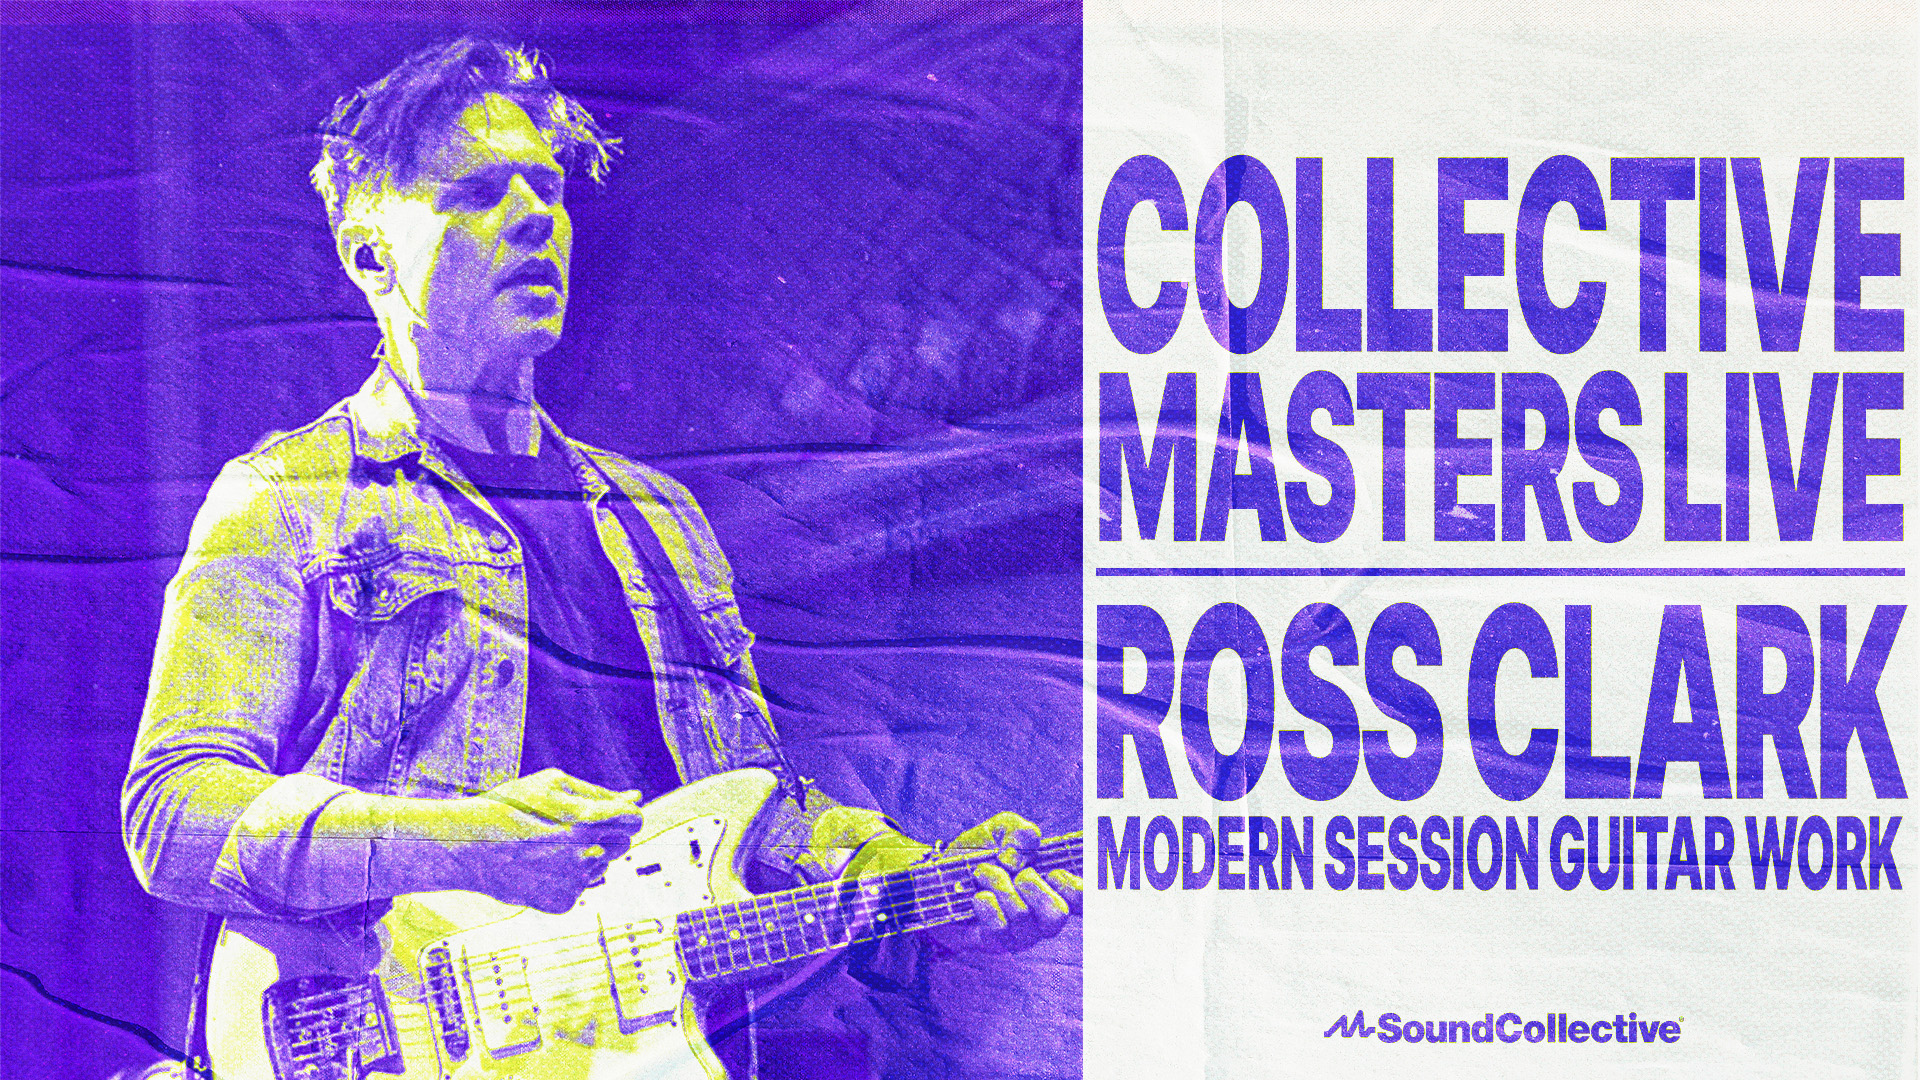 Ancel Klooster,The Drum Grillbook,The Collective,SoundCollective, Ross Clark: Modern Session Guitar Work, SoundCollective